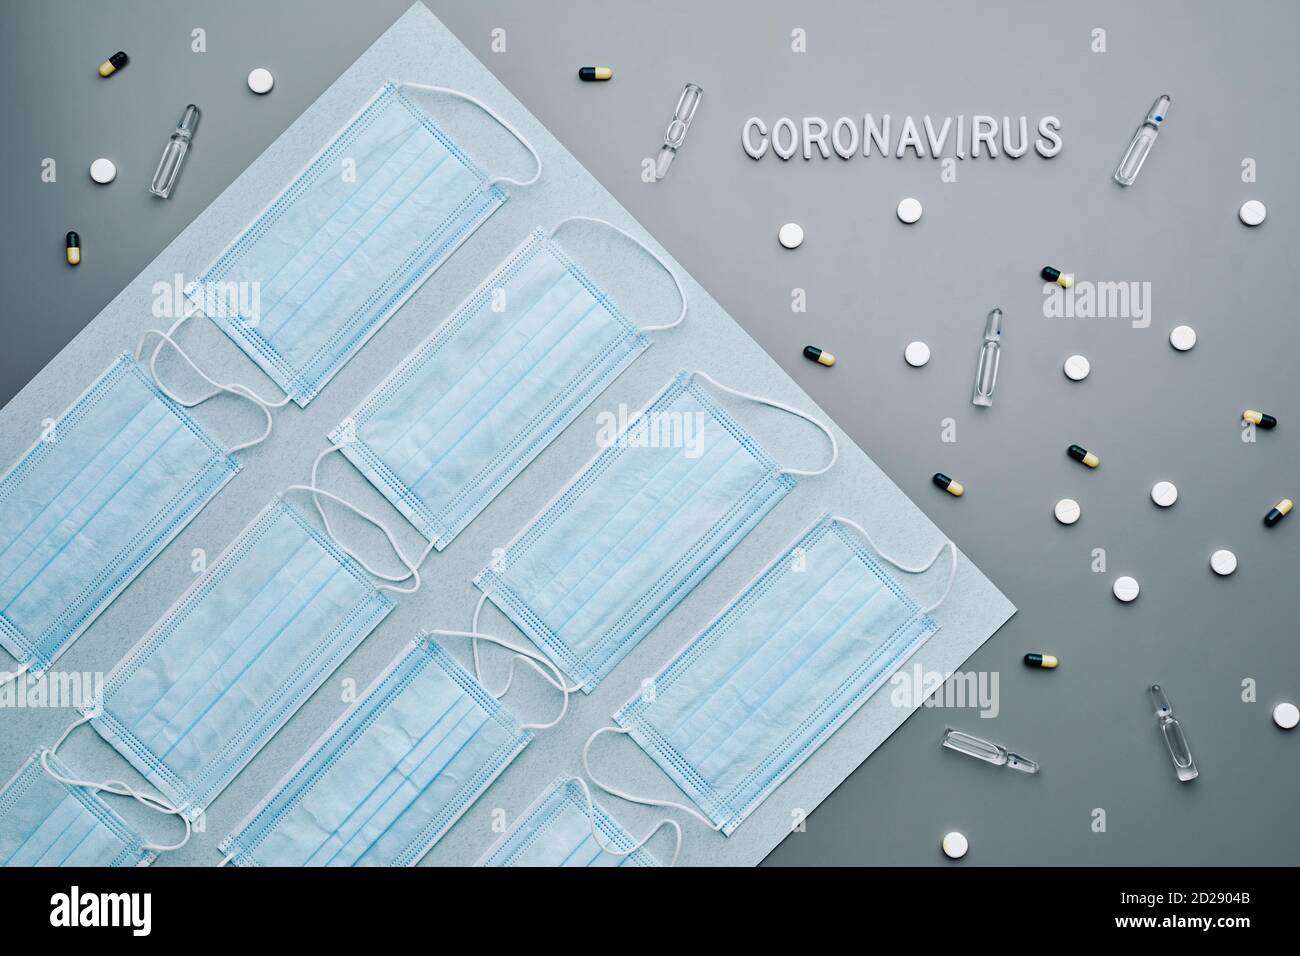 Top view composition of medical masks with coronavirus word and medication laid out in pattern over grey background, copy space Stock Photo